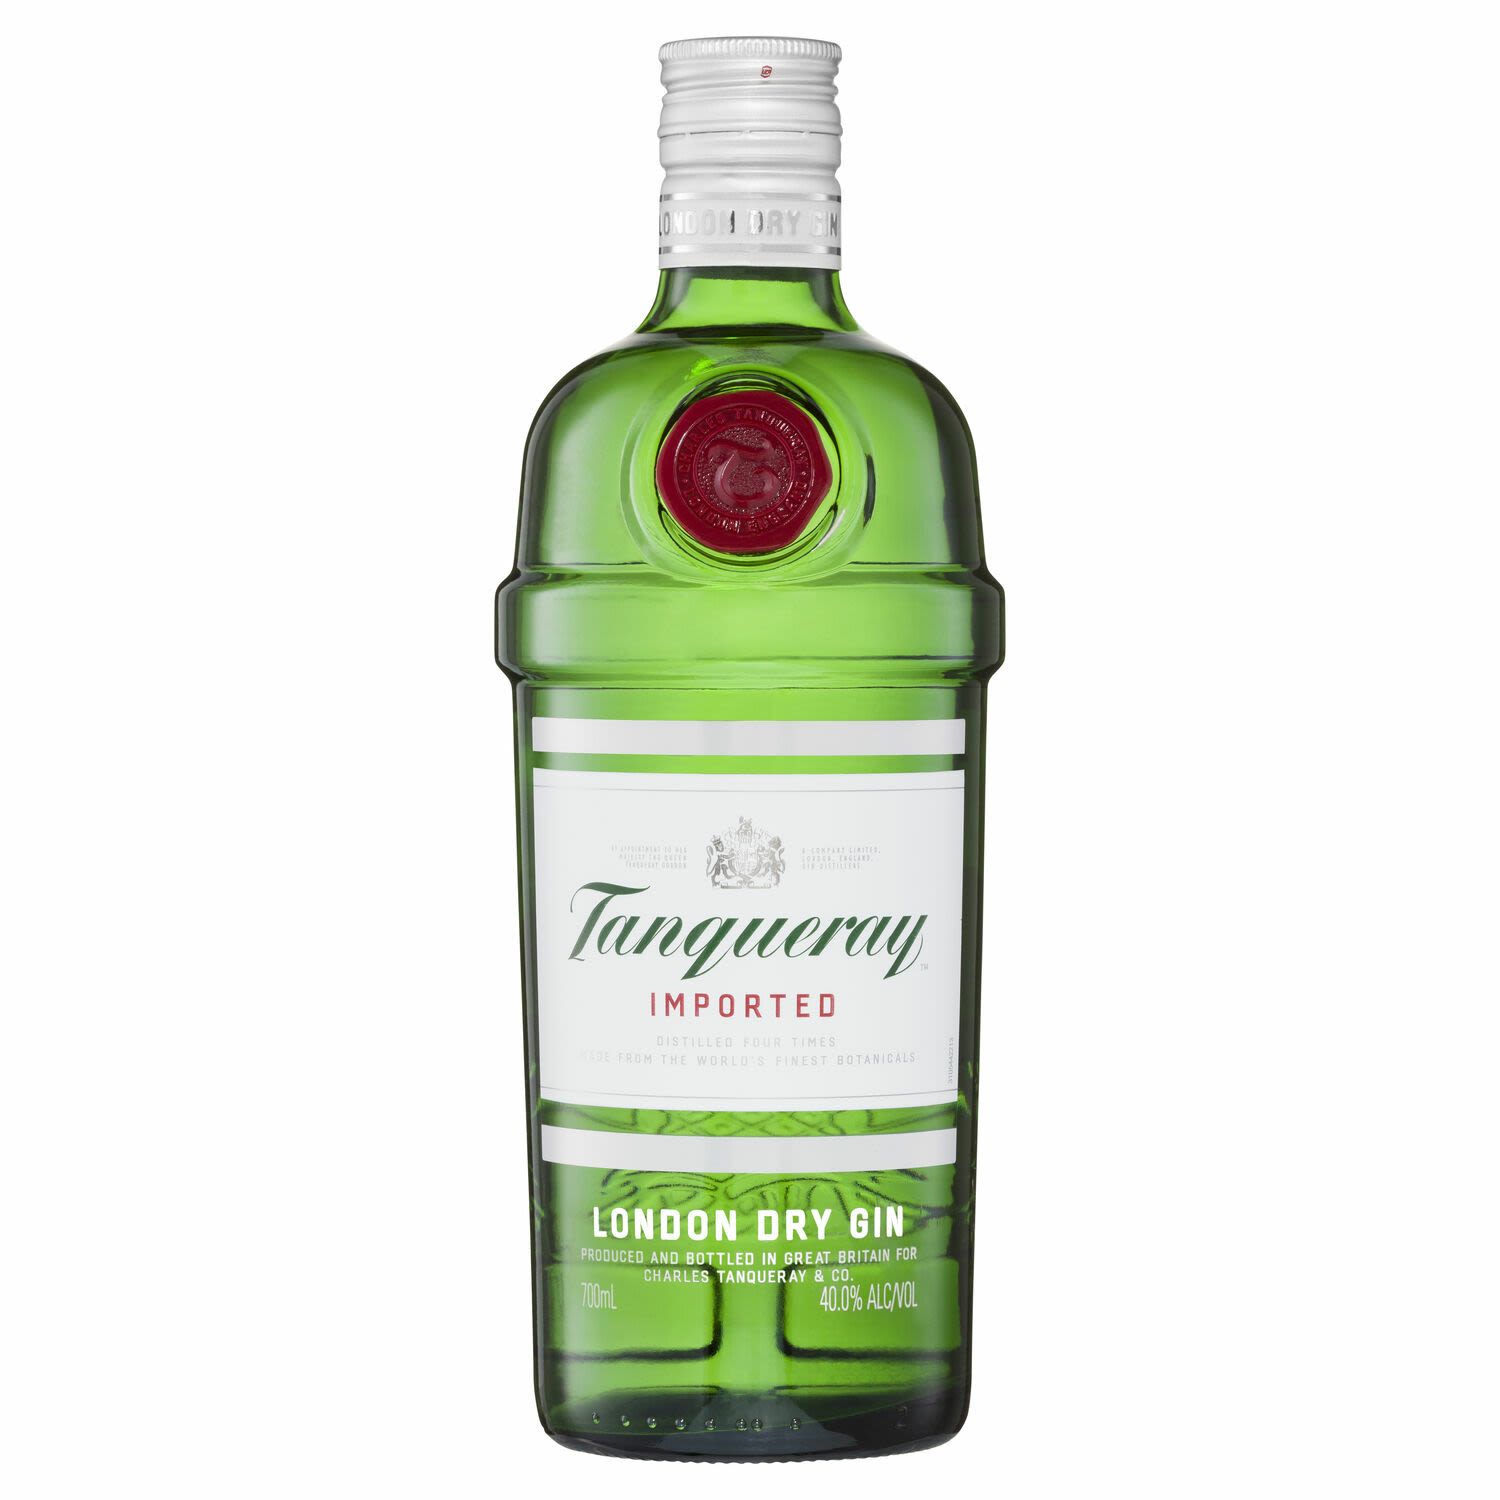 Tanqueray London Dry Gin 700mL Bottle